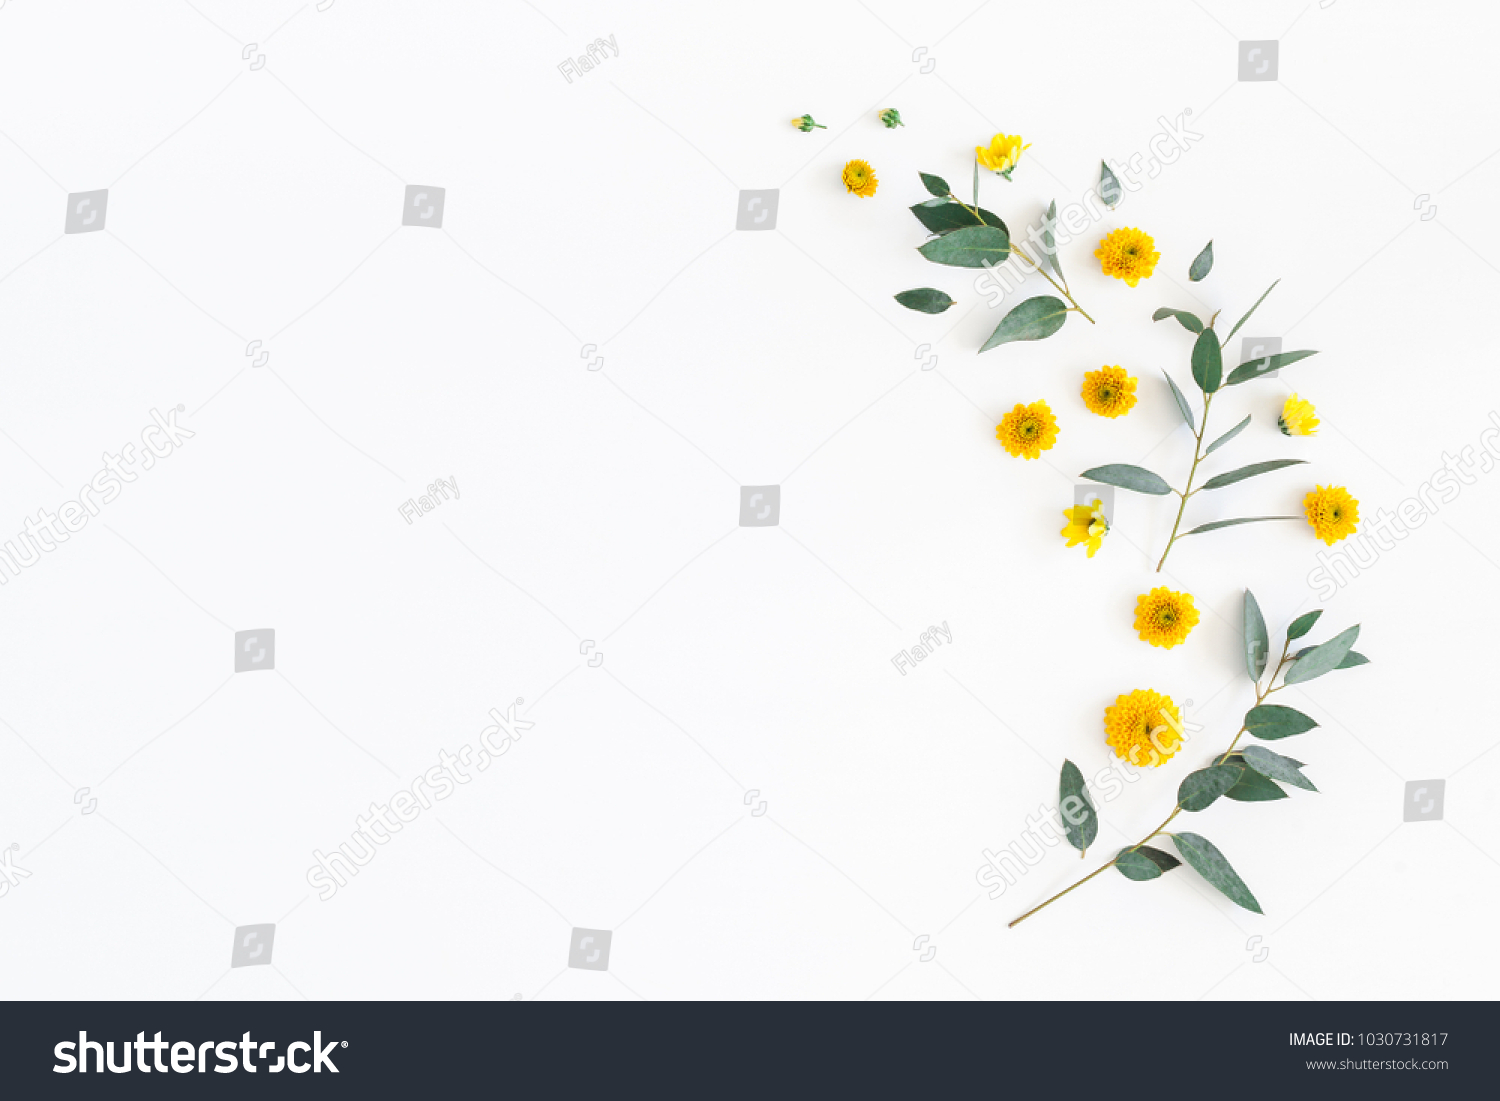 Flowers composition. Pattern made of yellow flowers and eucalyptus leaves on white background. Flat lay, top view, copy space #1030731817